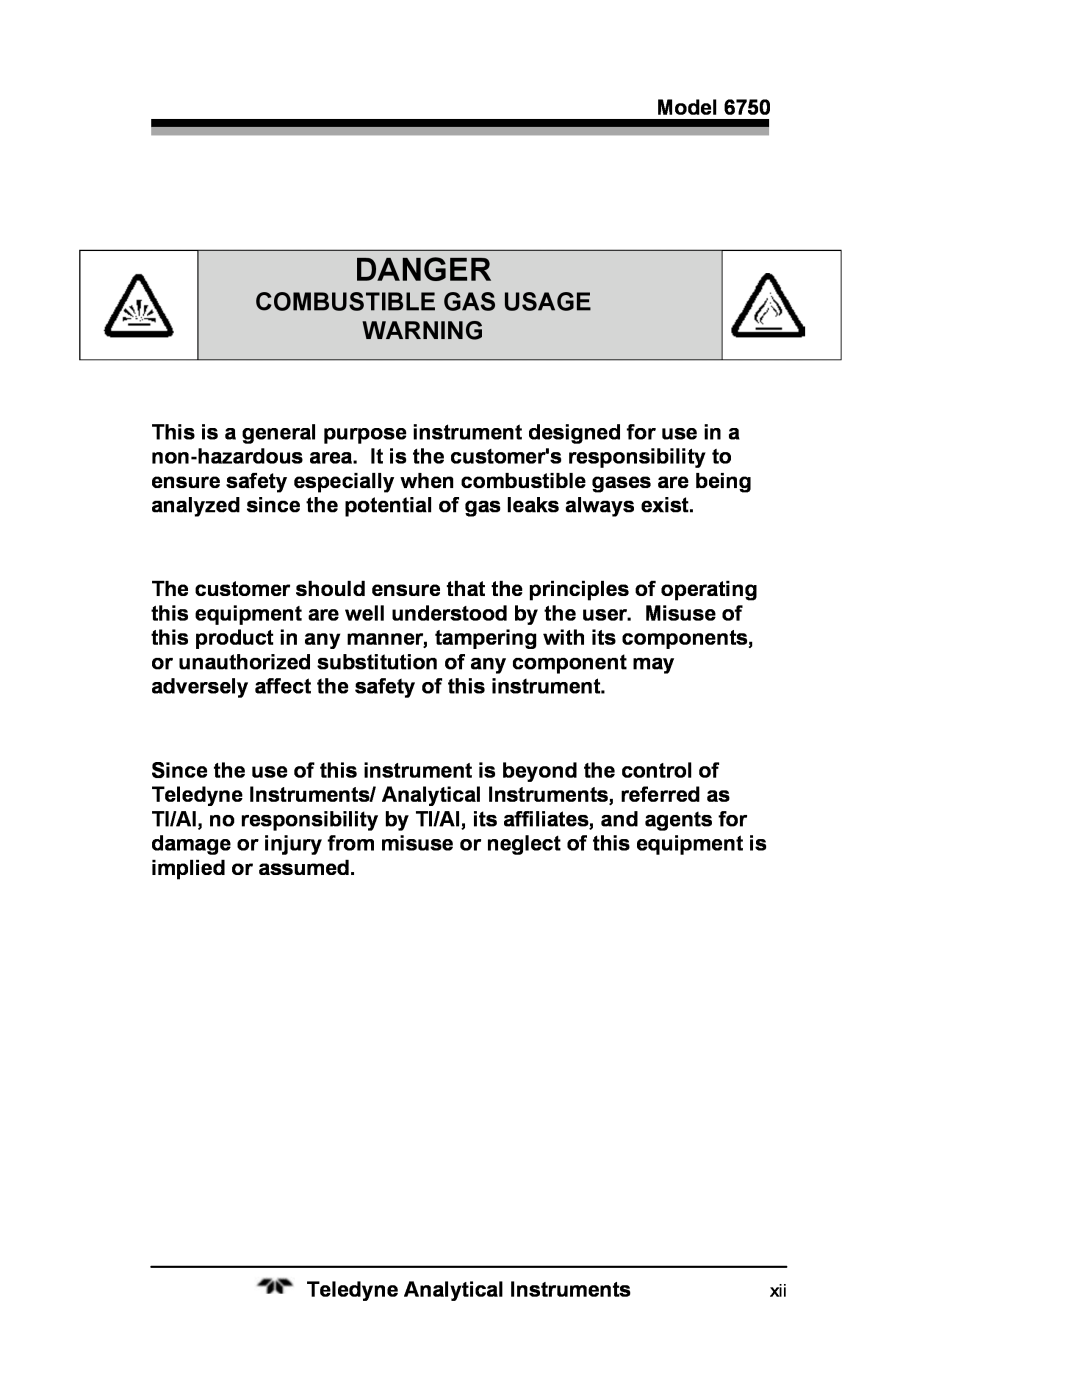 Teledyne 6750 operating instructions Combustible Gas Usage, Danger 